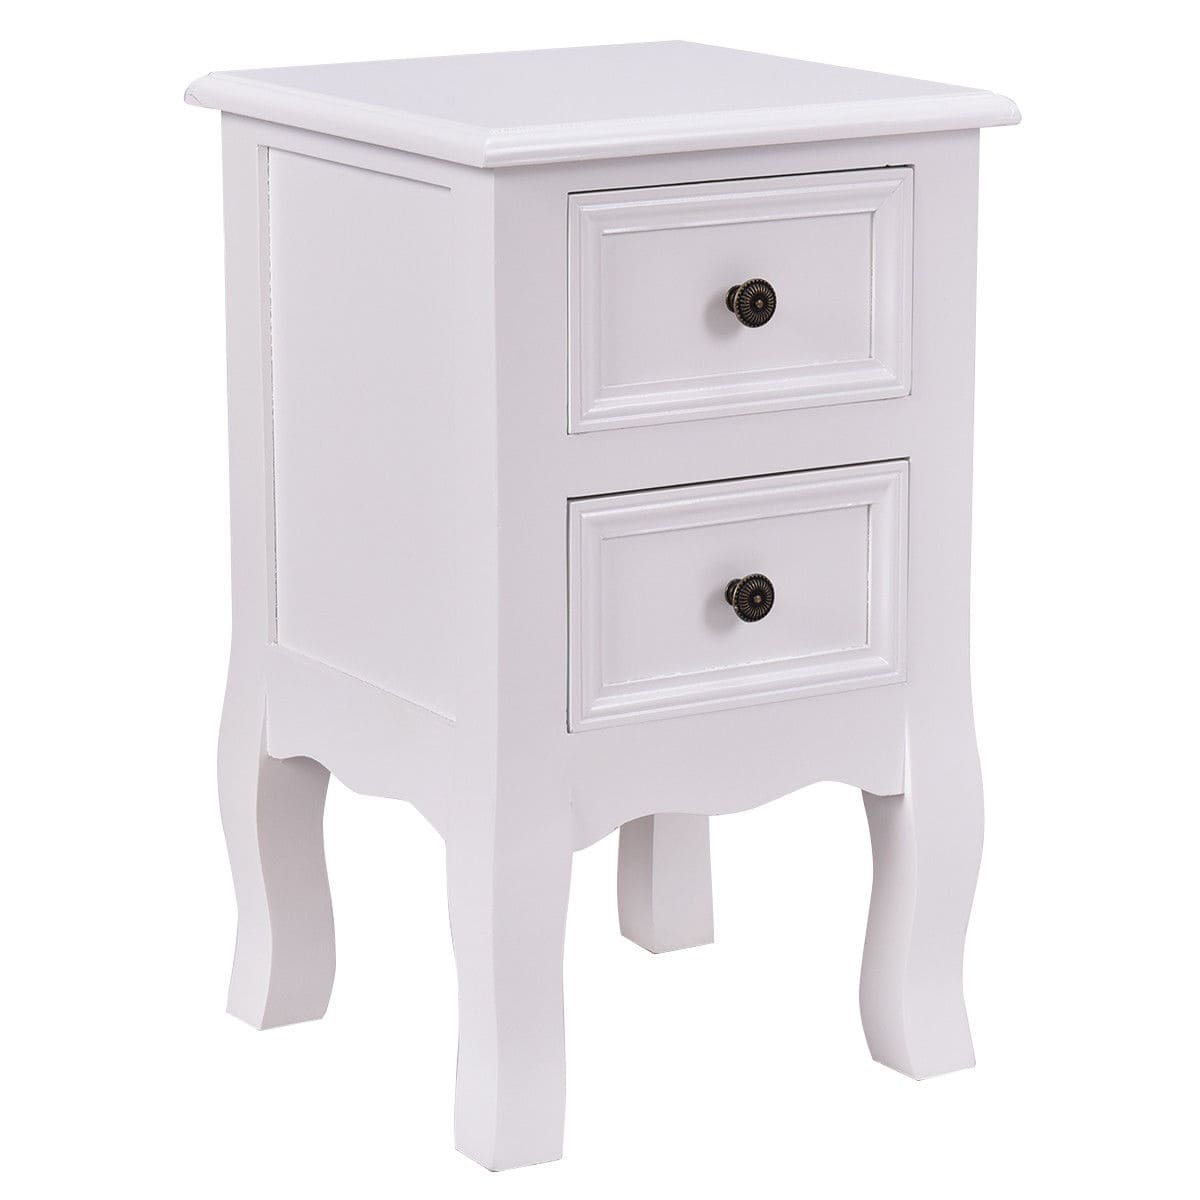 way white night stand storage drawers wood end accent table with free shipping today real marble coffee hollywood mirrored large round tables concrete dining and chairs small